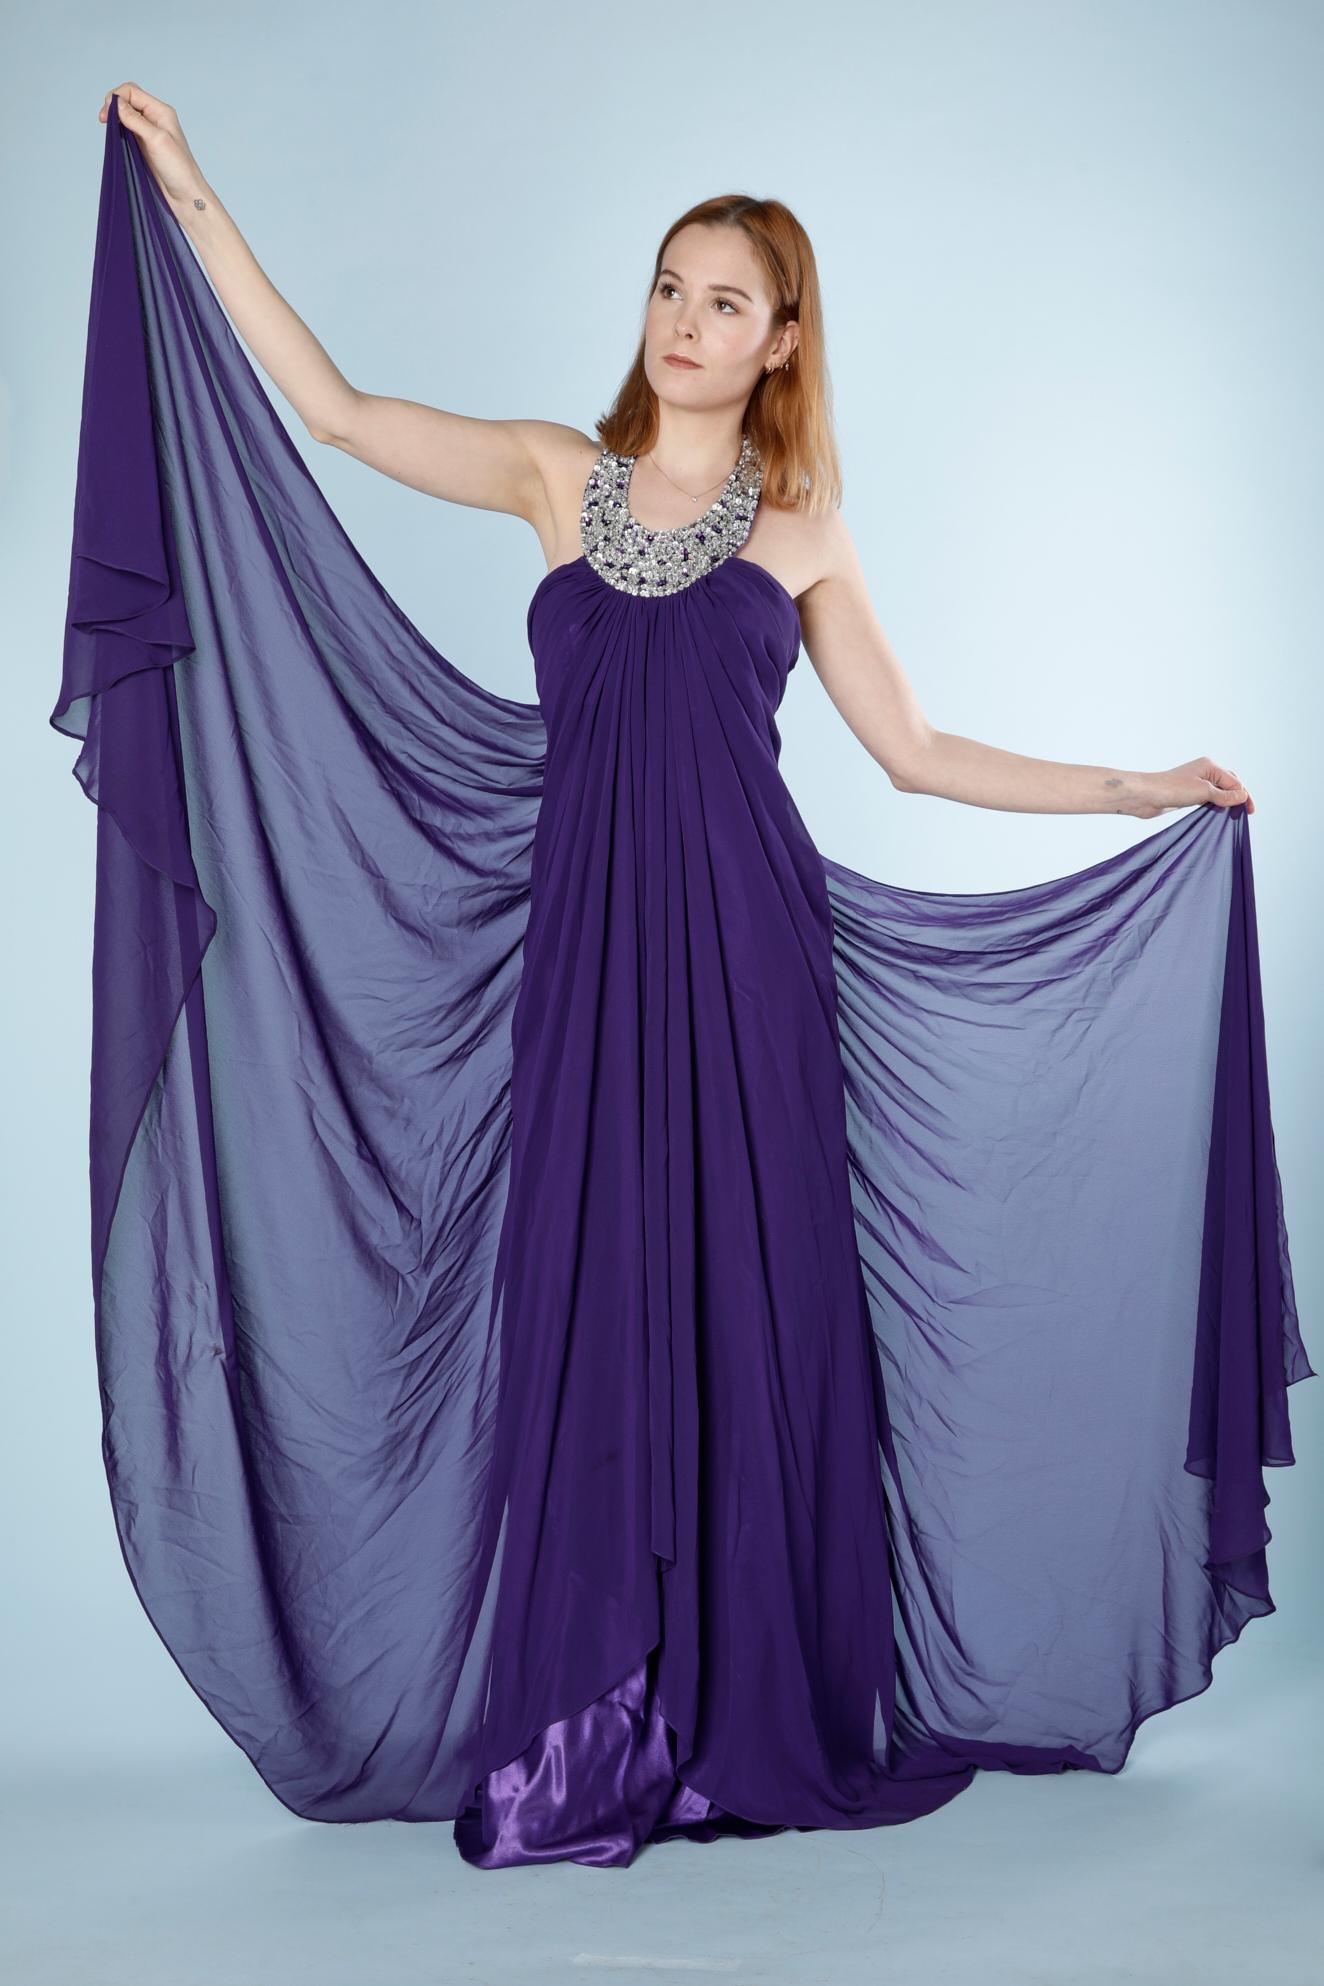 Long evening gown in purple chiffon and satin with a sequin neckless collar For Sale 2